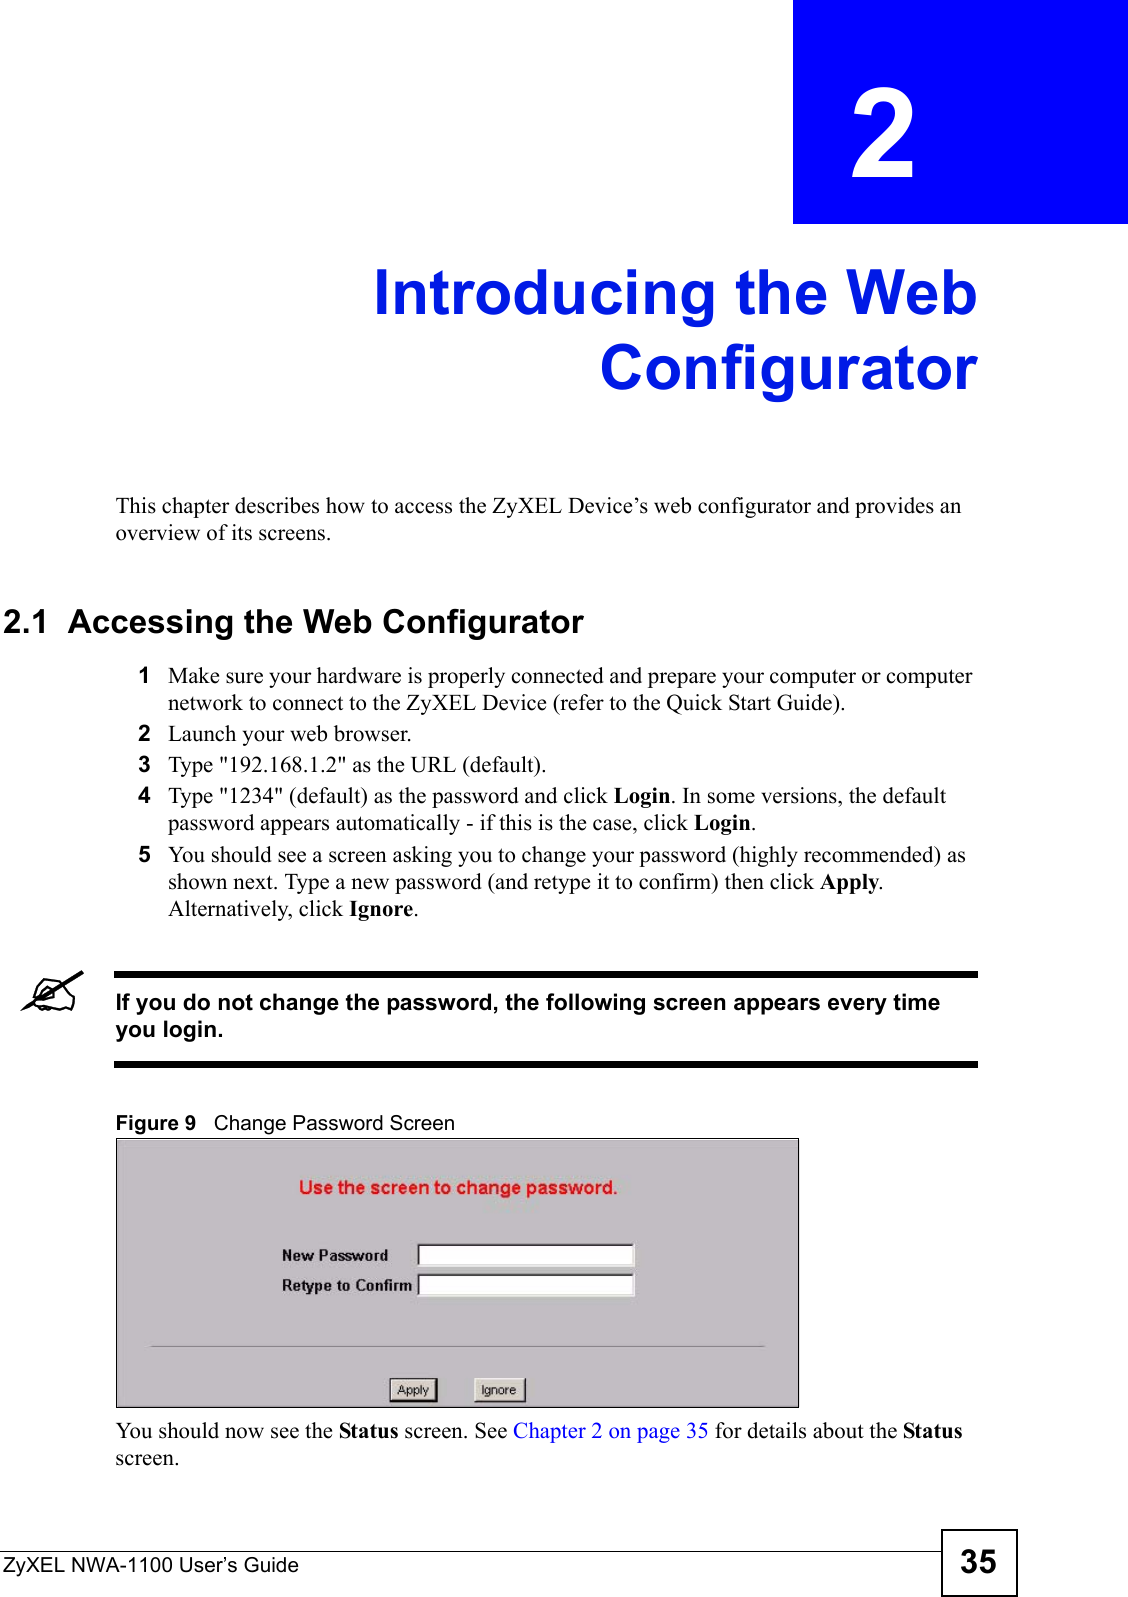 ZyXEL NWA-1100 User’s Guide 35CHAPTER  2 Introducing the WebConfiguratorThis chapter describes how to access the ZyXEL Device’s web configurator and provides an overview of its screens. 2.1  Accessing the Web Configurator1Make sure your hardware is properly connected and prepare your computer or computer network to connect to the ZyXEL Device (refer to the Quick Start Guide).2Launch your web browser.3Type &quot;192.168.1.2&quot; as the URL (default).4Type &quot;1234&quot; (default) as the password and click Login. In some versions, the default password appears automatically - if this is the case, click Login. 5You should see a screen asking you to change your password (highly recommended) as shown next. Type a new password (and retype it to confirm) then click Apply. Alternatively, click Ignore.&quot;If you do not change the password, the following screen appears every time you login.Figure 9   Change Password ScreenYou should now see the Status screen. See Chapter 2 on page 35 for details about the Status screen.